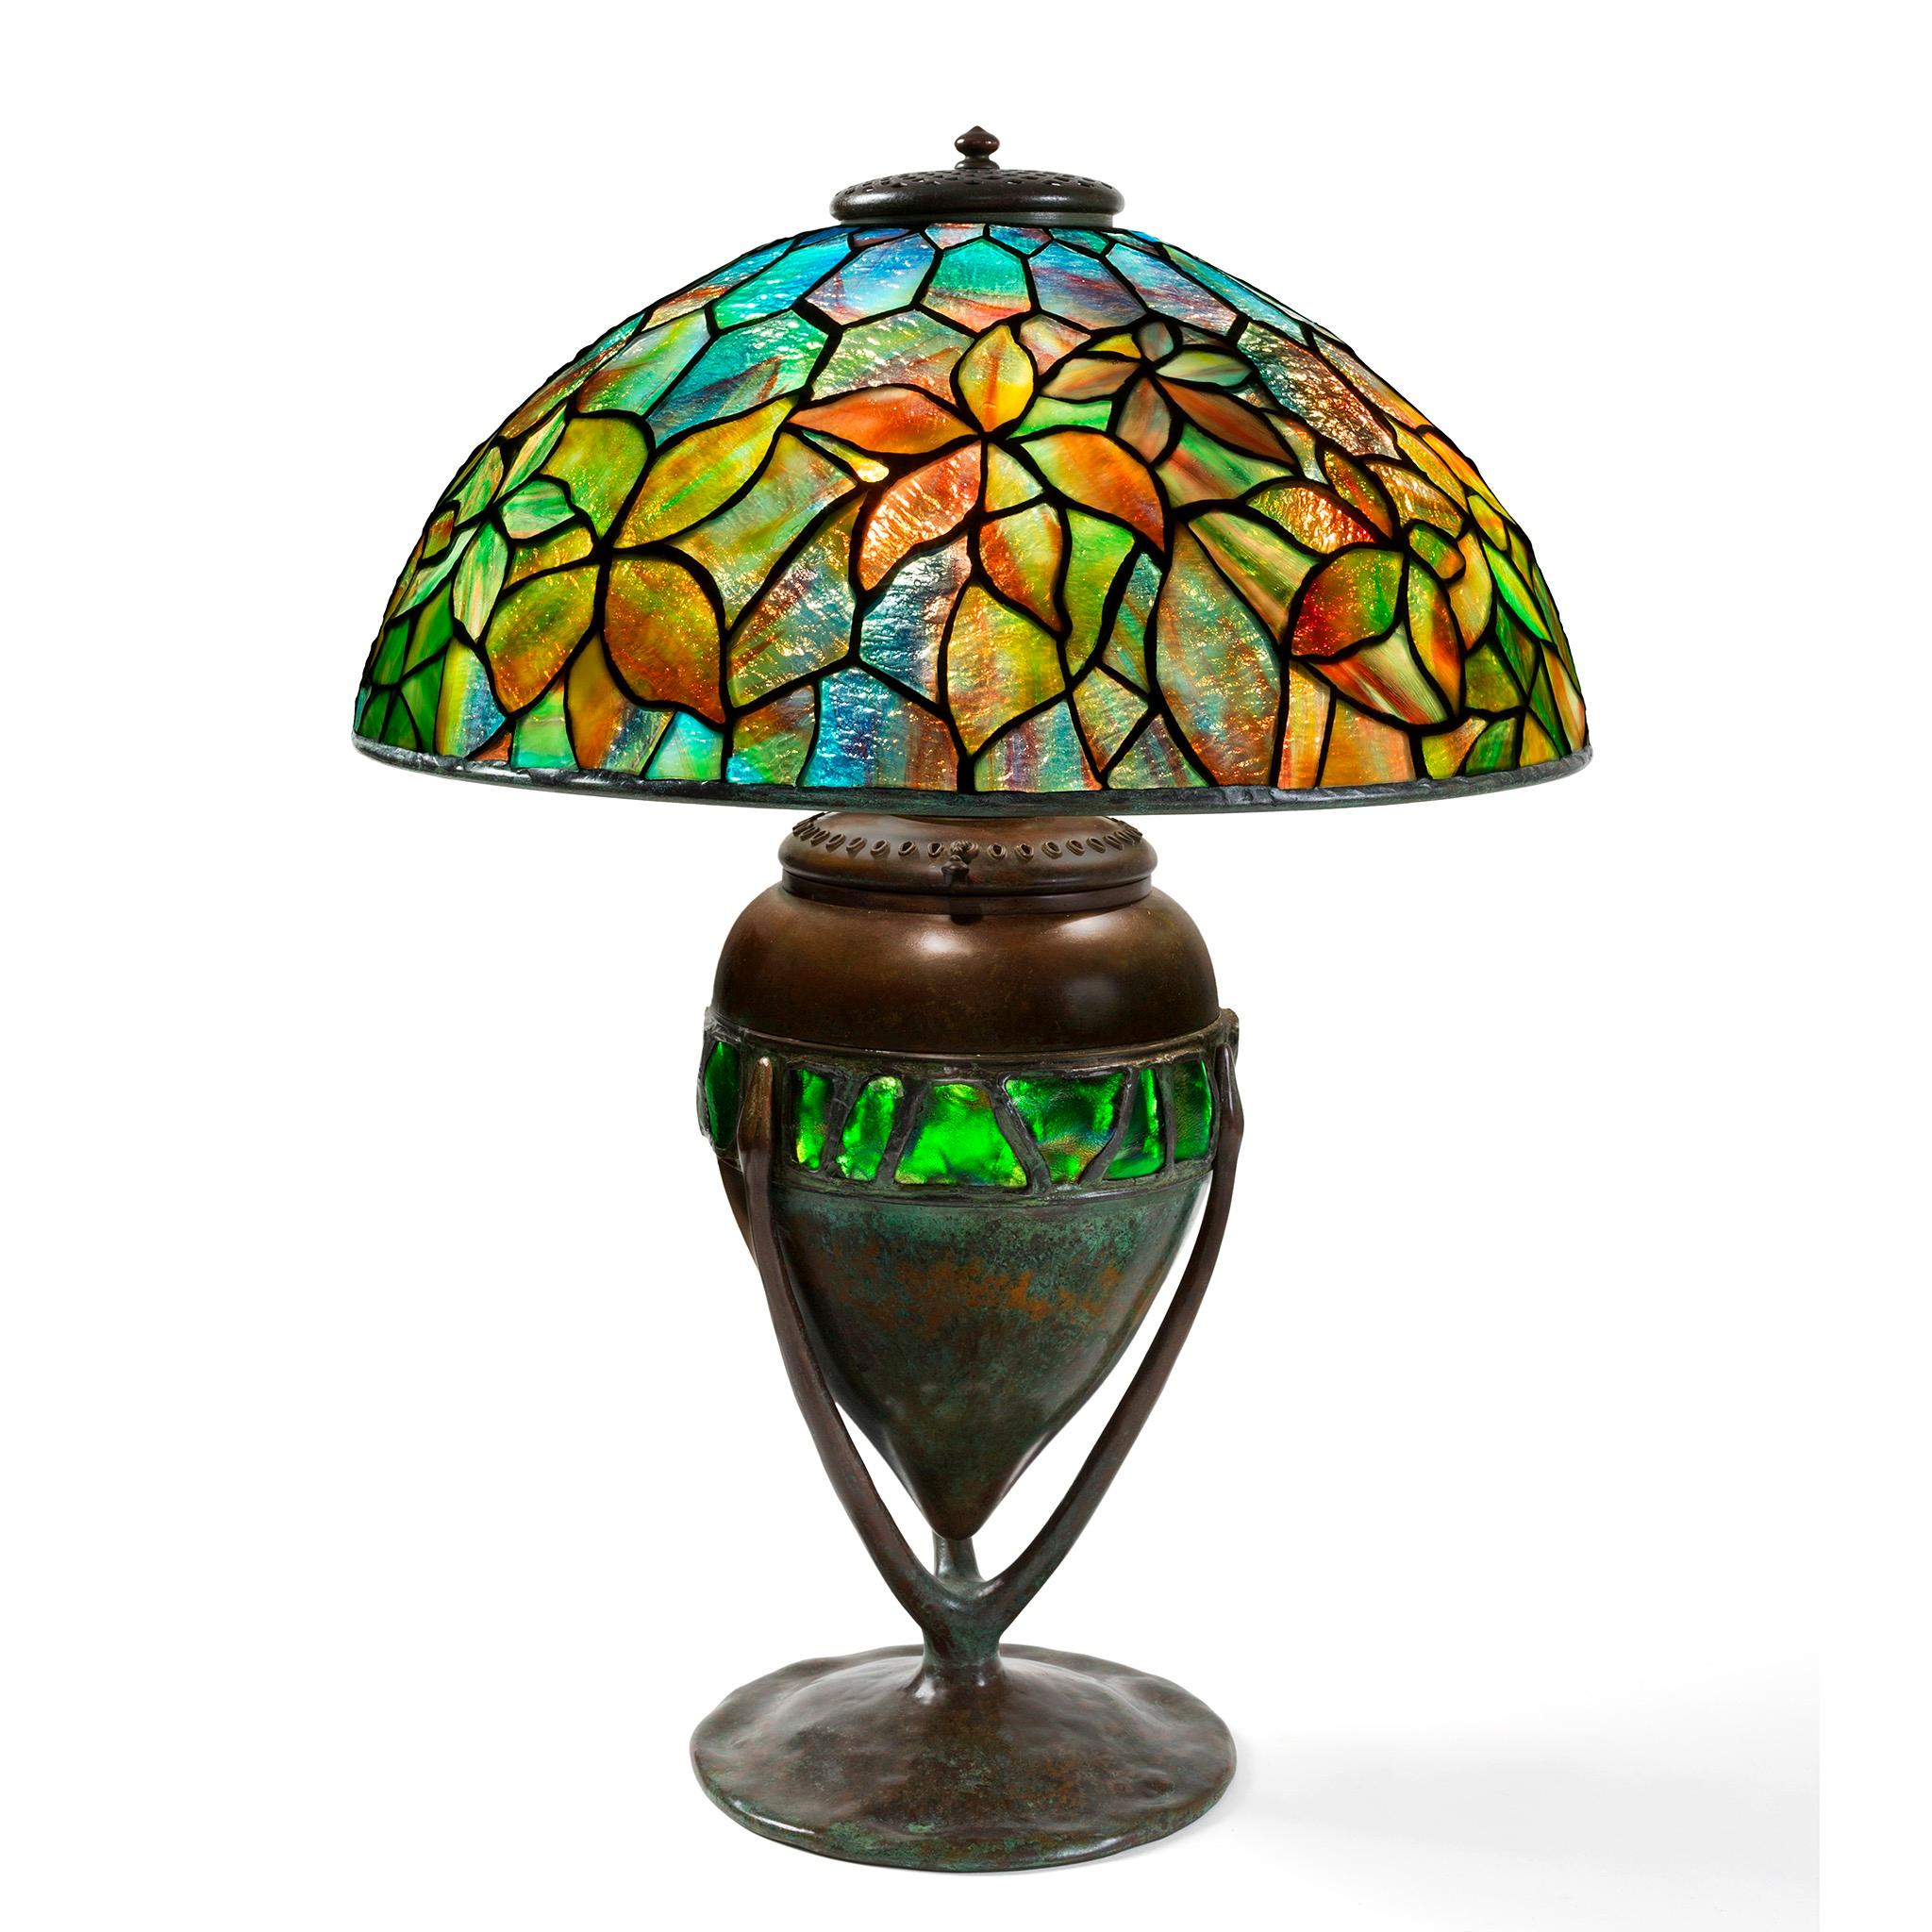 With a kaleidoscope of colors adorning the shade, and a unique motif of special 